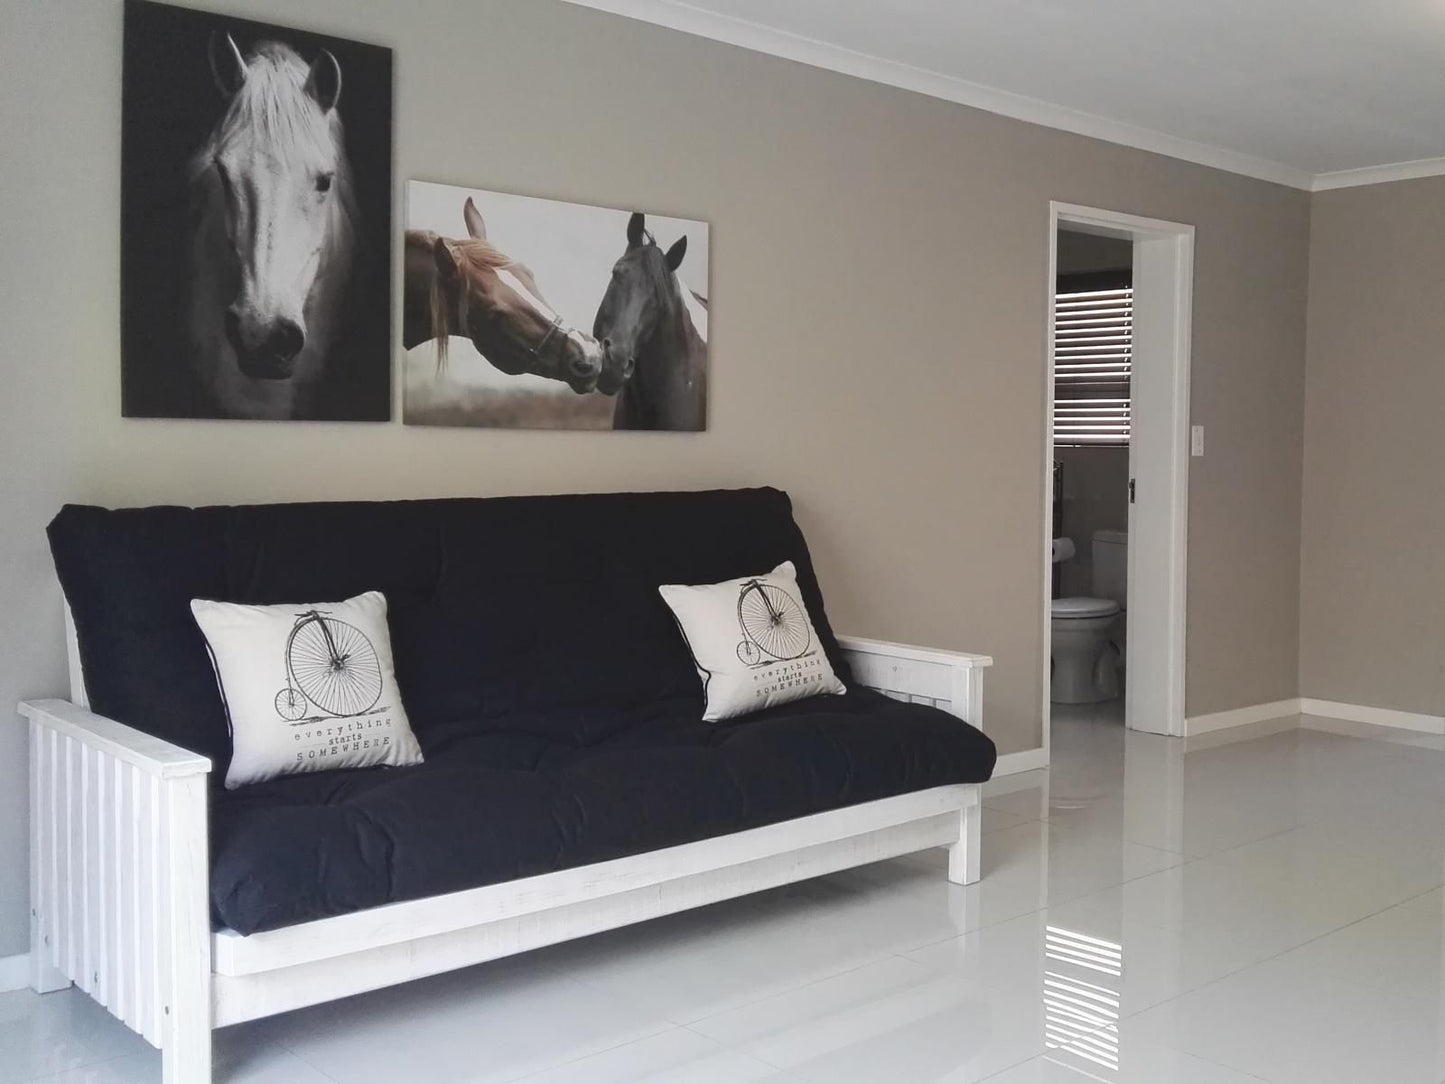 Bergsig Self Catering Mansfield Gordons Bay Western Cape South Africa Unsaturated, Horse, Mammal, Animal, Herbivore, Bedroom